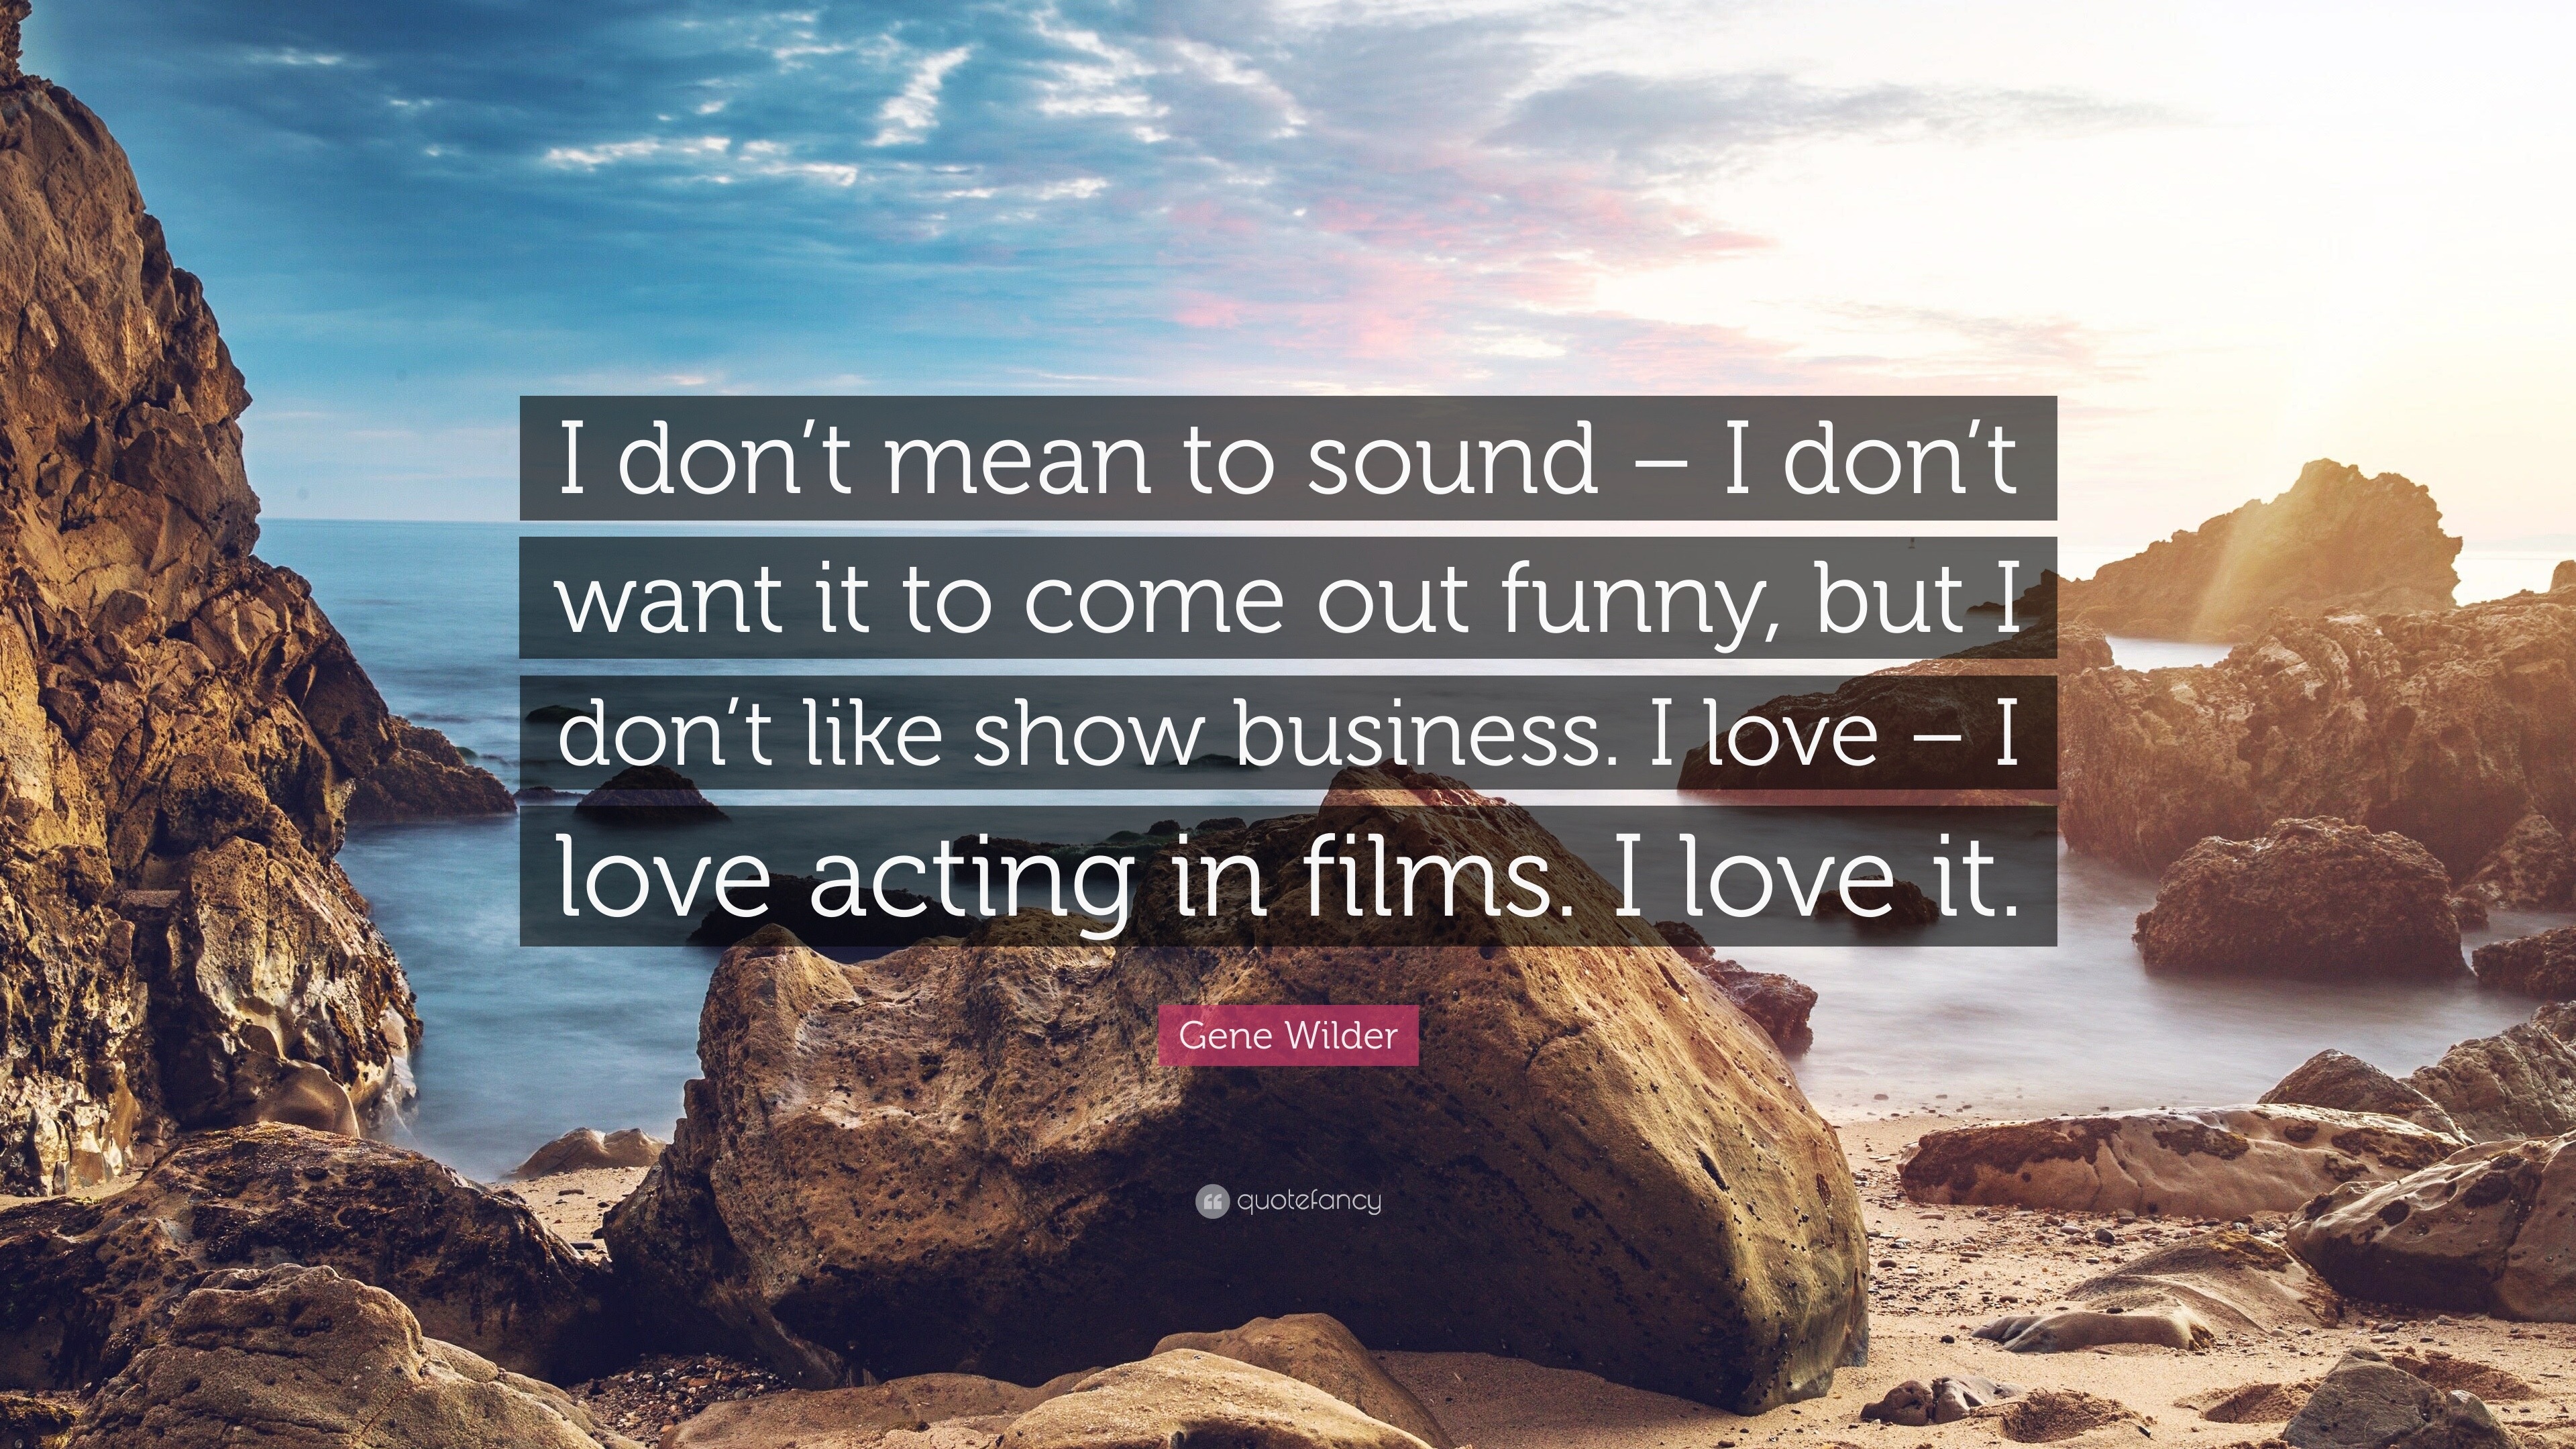 Gene Wilder Quote: “I don't mean to sound – I don't want it to come out  funny, but I don't like show business. I love – I love acting in fil...”